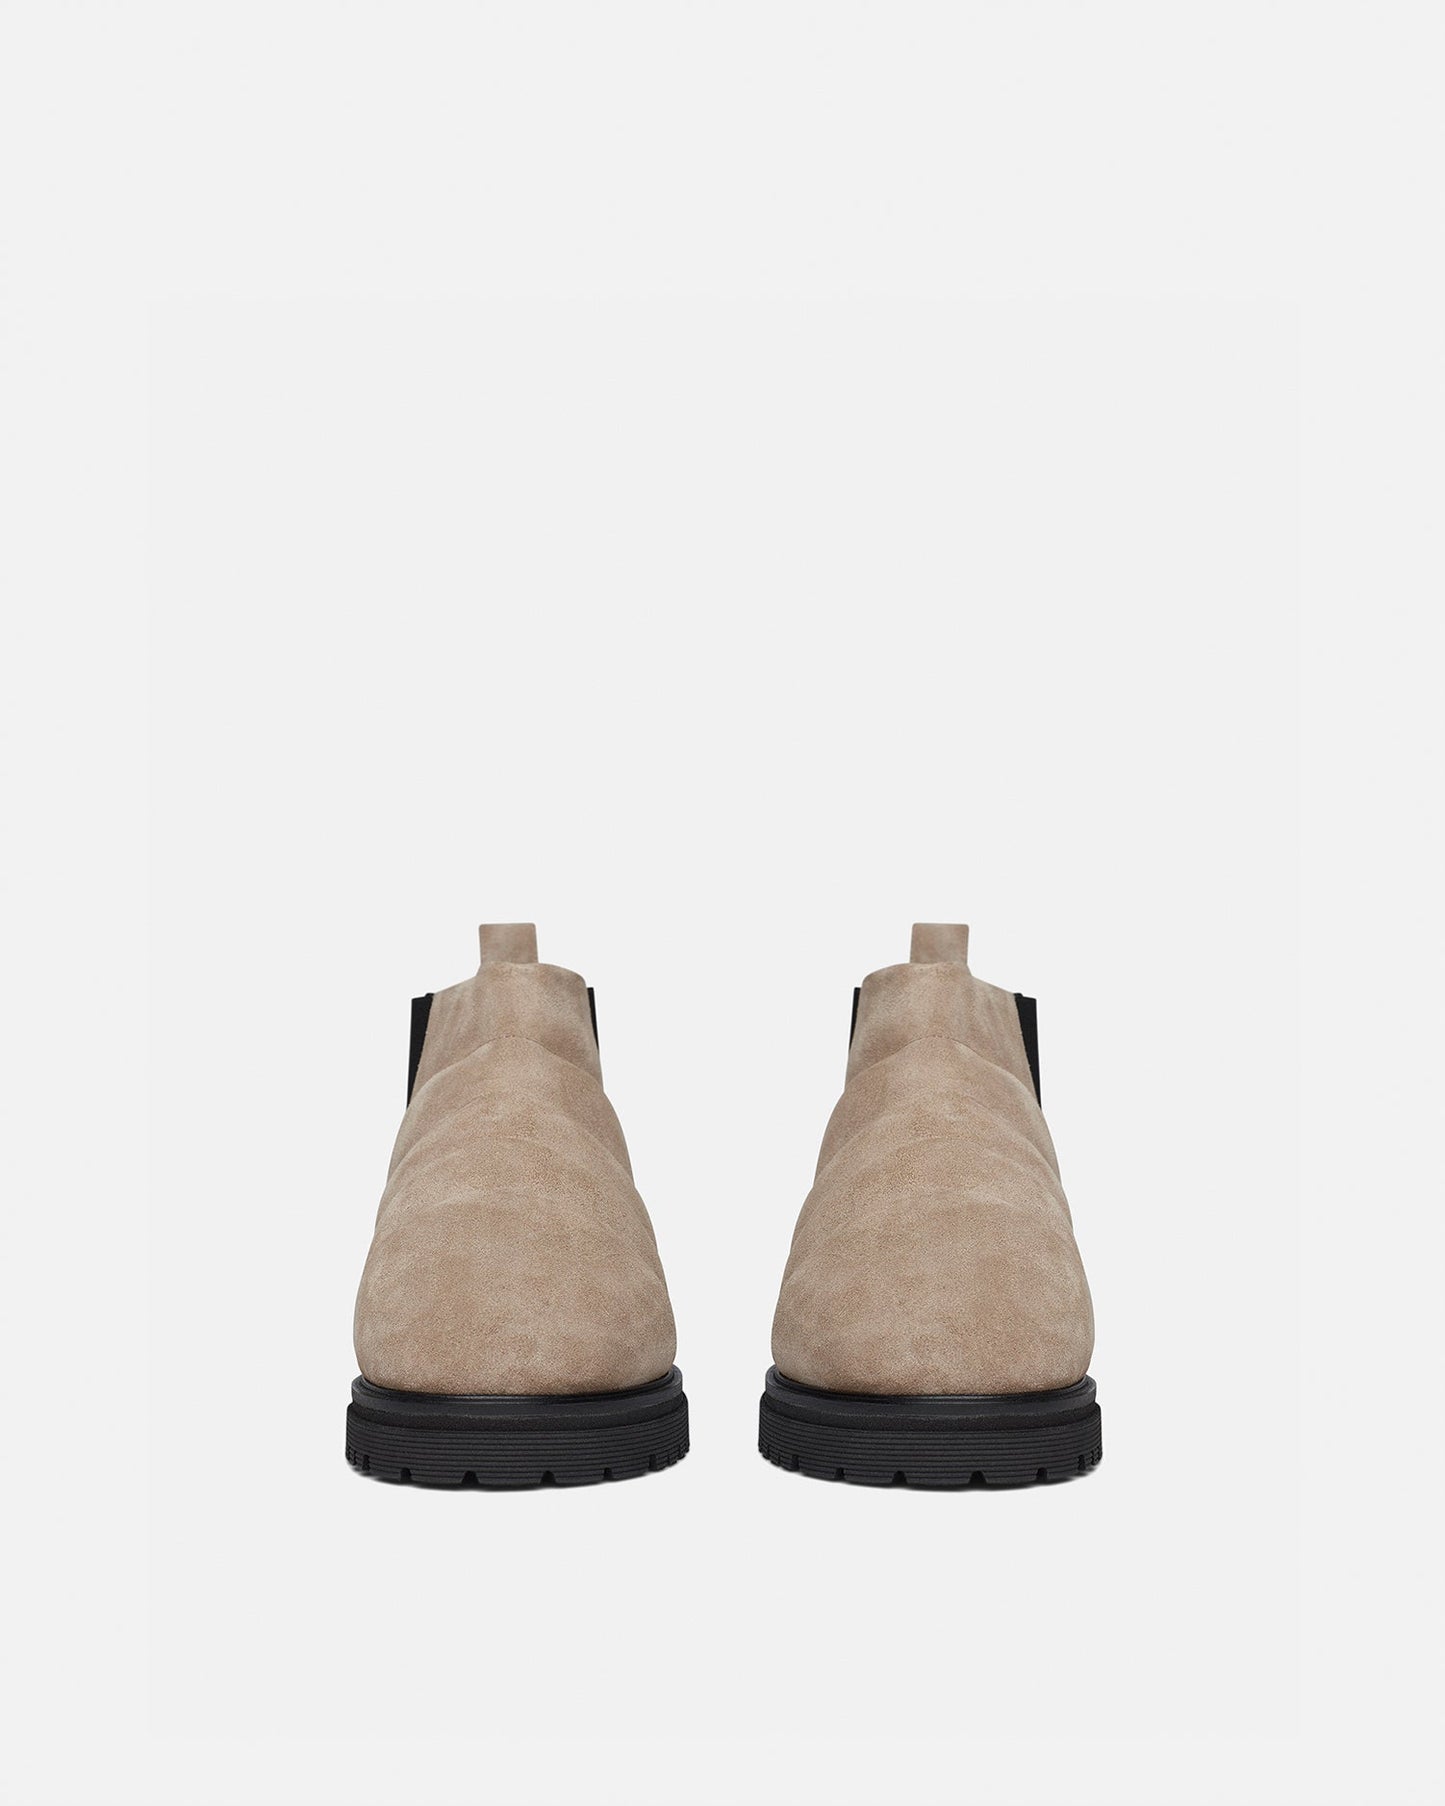 Bede - Rounded Toe Boot - Stone